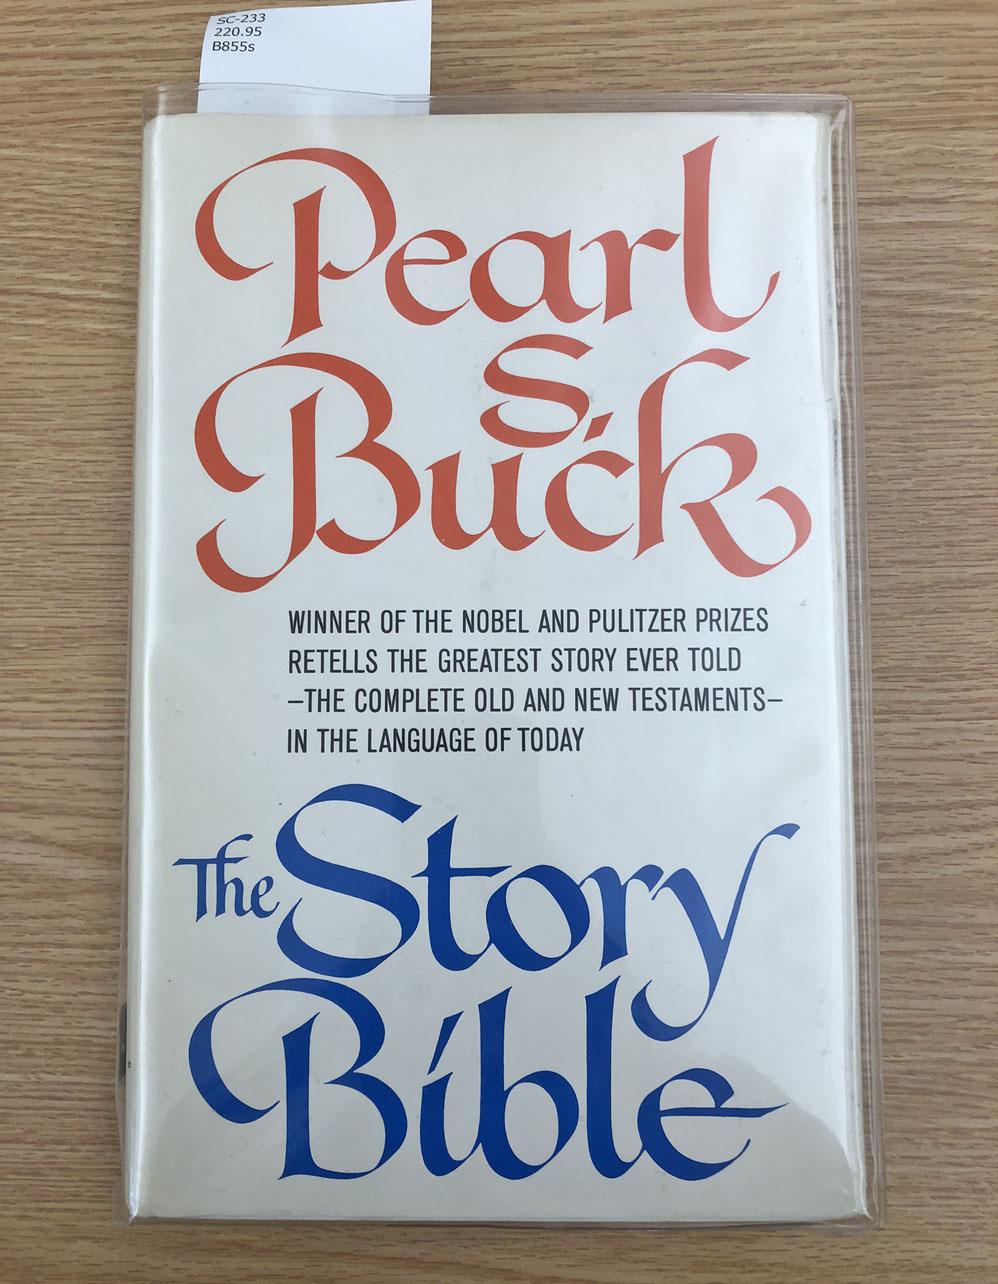 A reading Bible by author Pearl S. Buck, 1971 (SC-233)